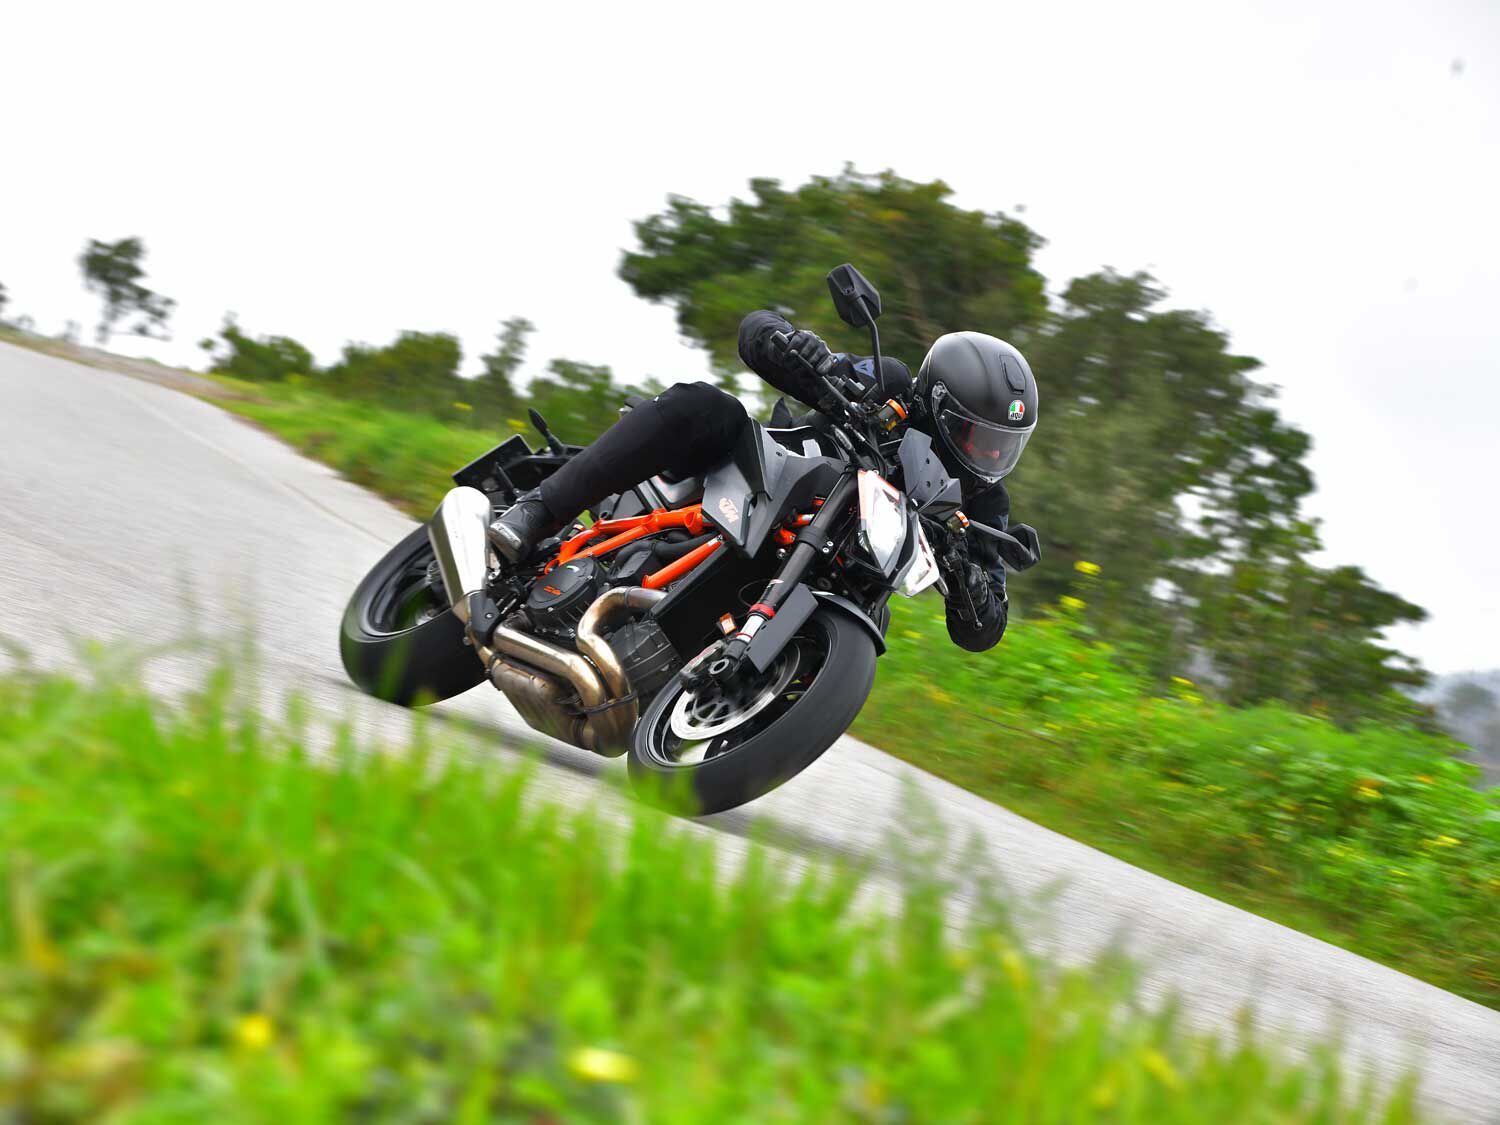 Not only is the 1290 Super Duke R more adept on track, the handling refinements pay dividends on the road with it offering superior levels of comfort than its predecessor.